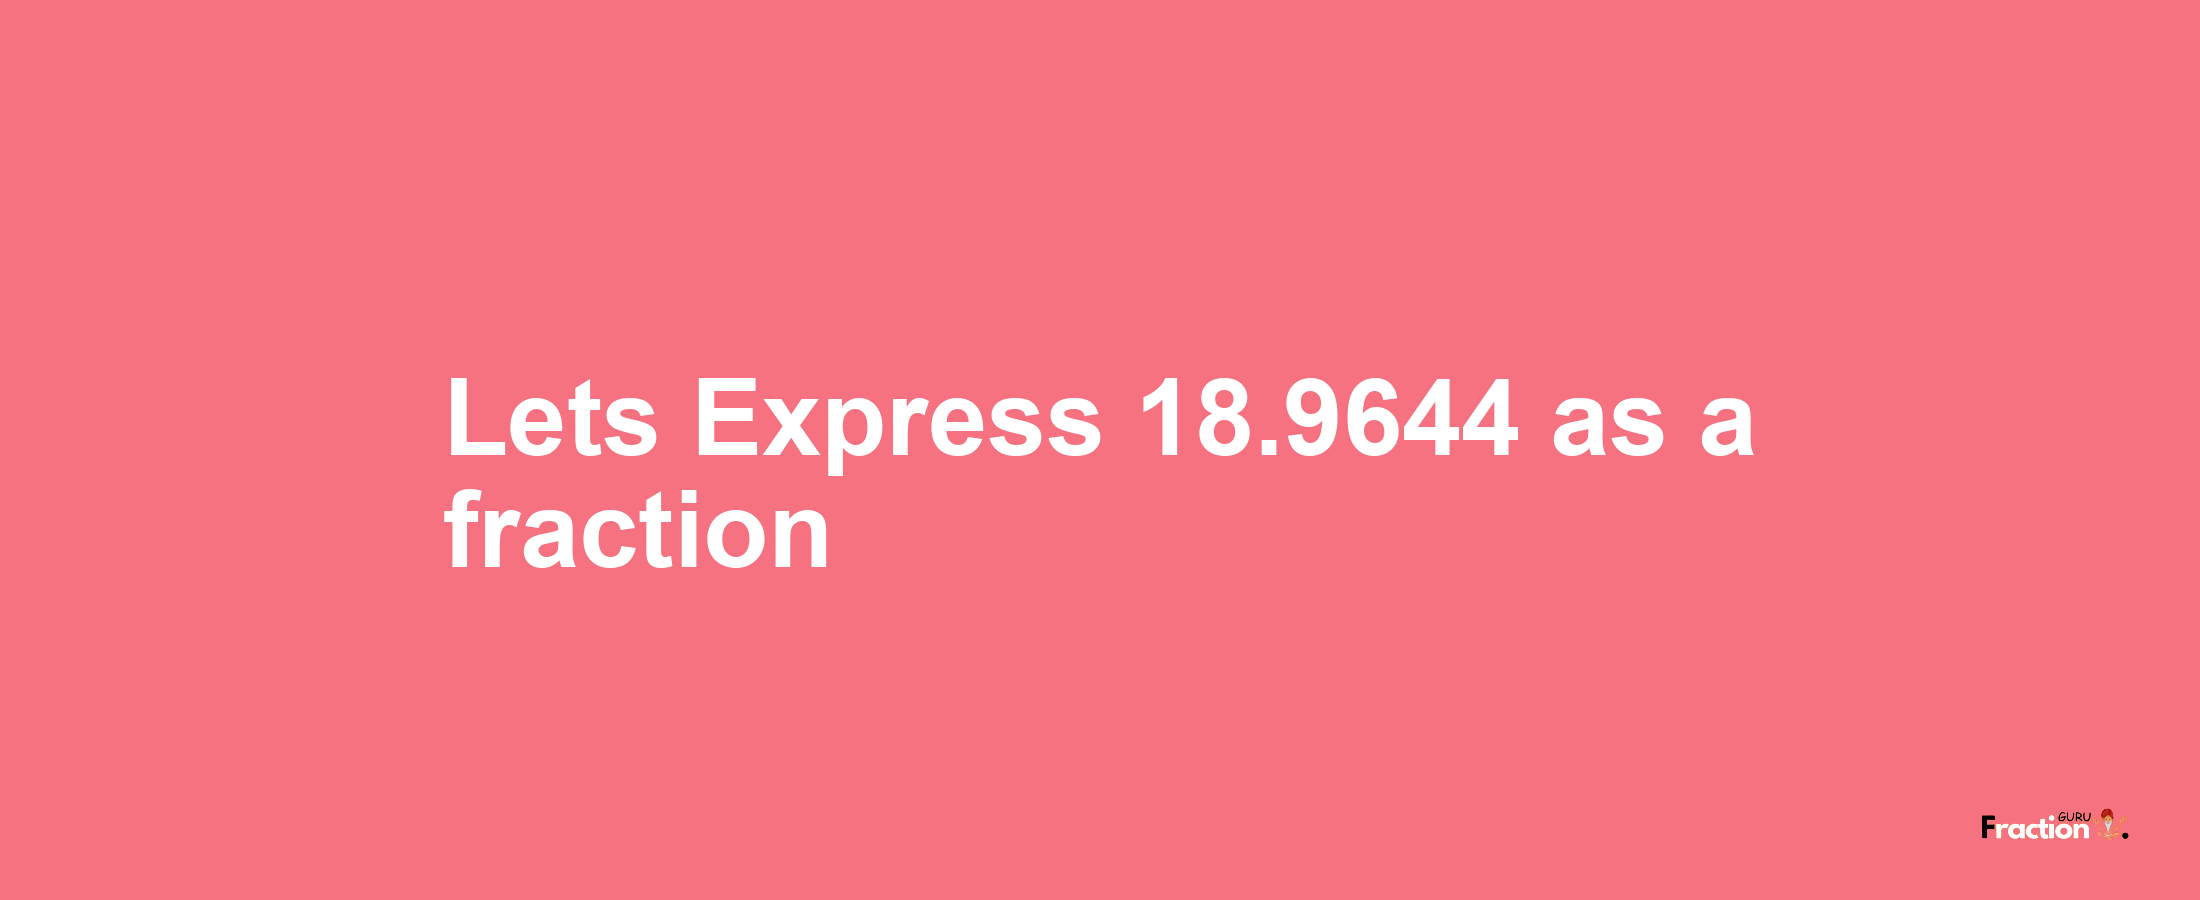 Lets Express 18.9644 as afraction